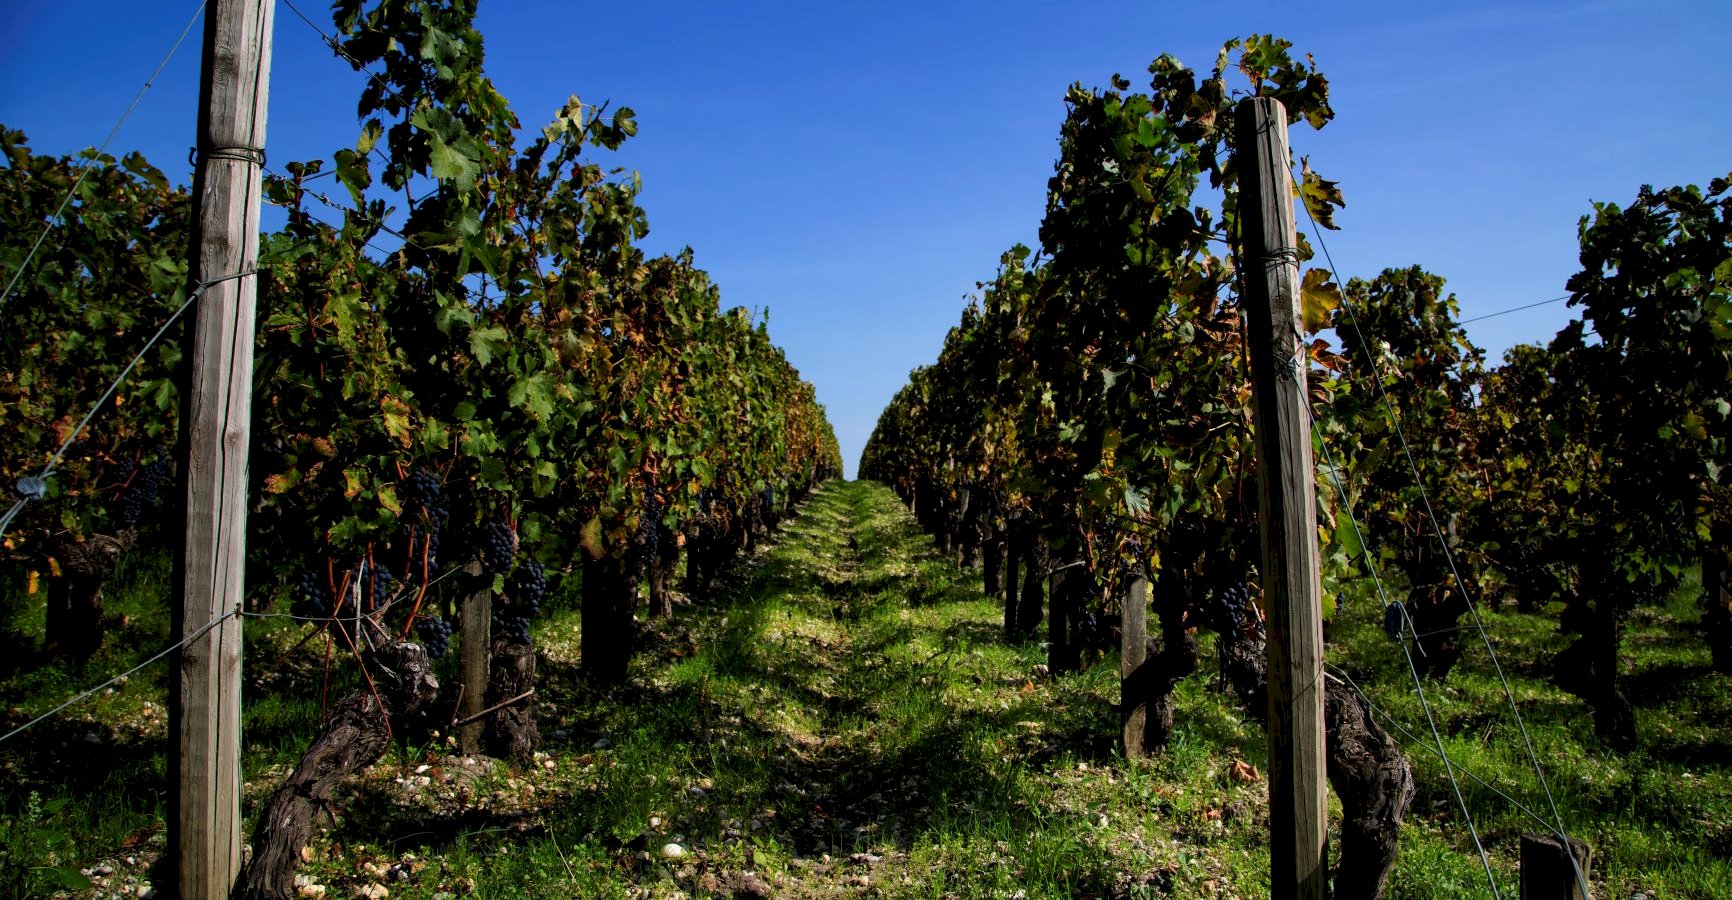 Ophorus Tours - Medoc, St Emilion and Graves Wine Tour Small Group Private Full Day Trip from Bordeaux